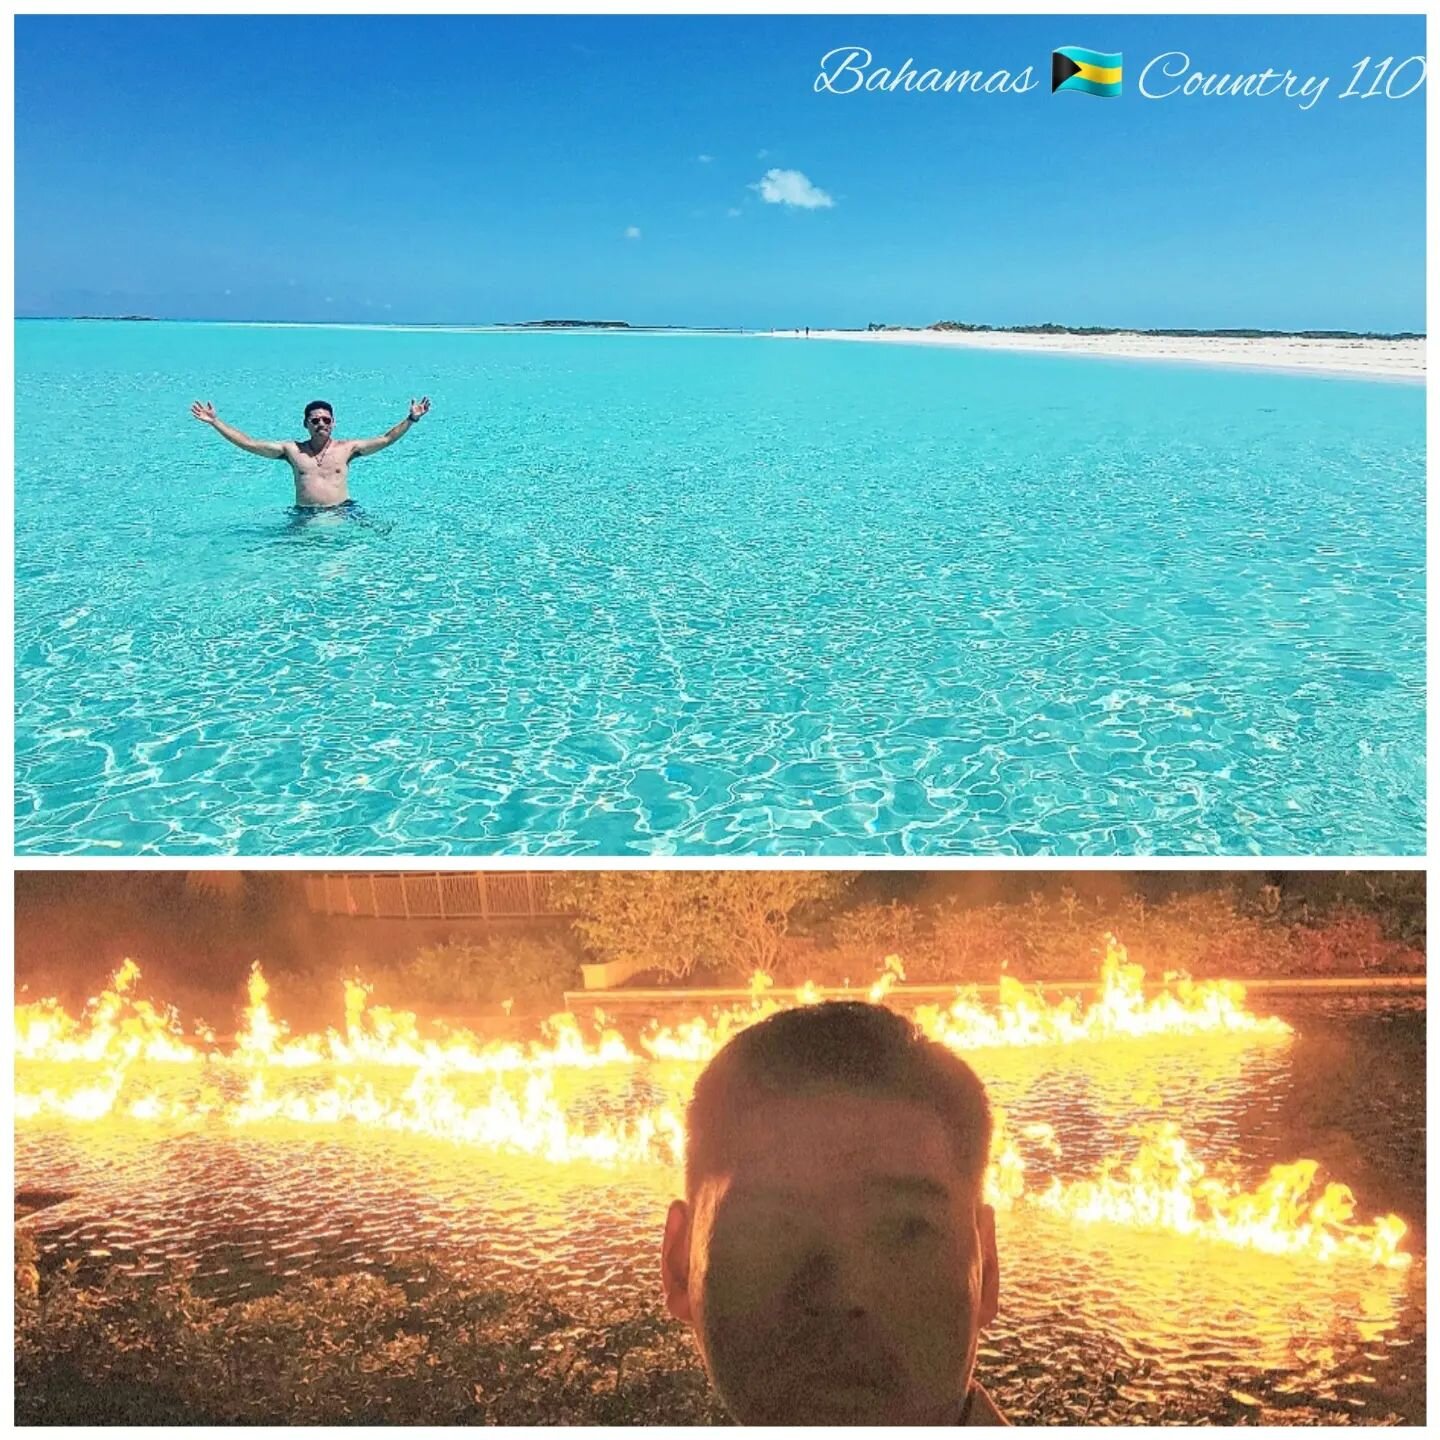 Swimming with pigs, feeding iguanas, nursing nurse sharks, winning on 36 in Roulette, and much more -Byebye Bahamas🇧🇸 110. 

Public speaking tip -don't worry too much on what your going to say when you start, too many people let the uncertainty of 